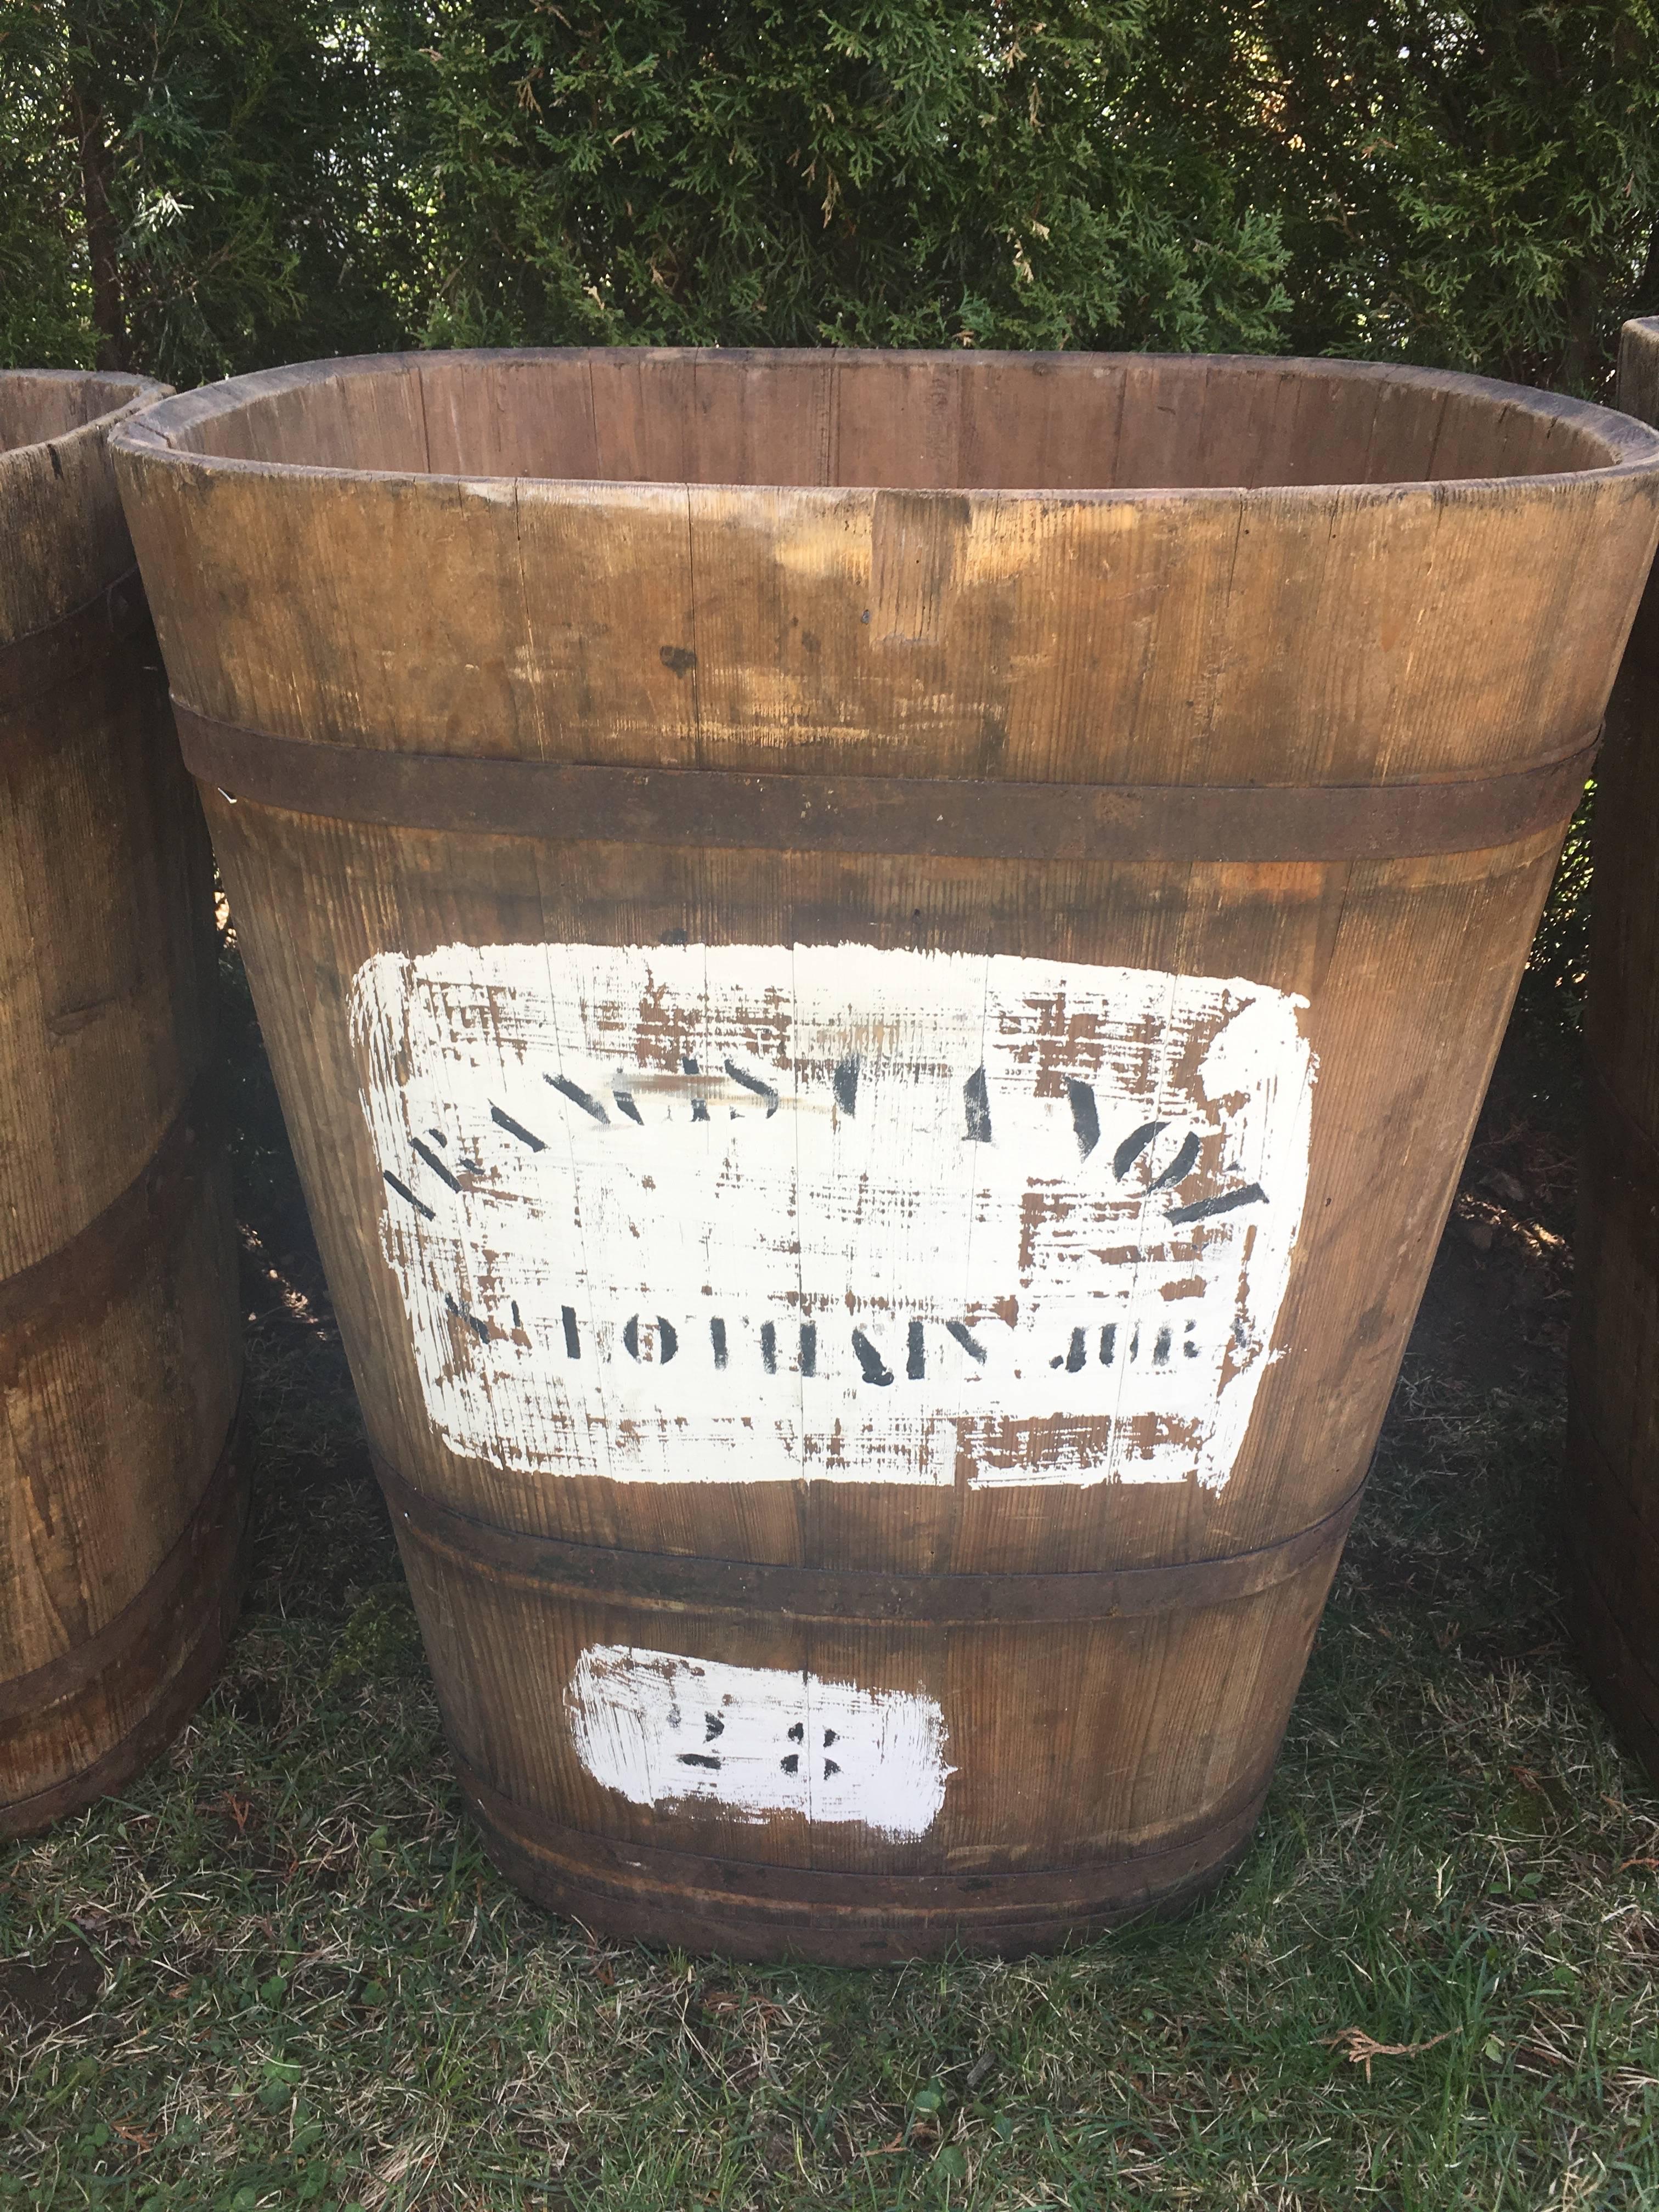 In addition to the four pairs of very large wooden tubs that were used as Master Collection Vessels for the grape harvest in Alsace, we also bought a single one that is features later stencilling. The large stencil is undecipherable, but this tub